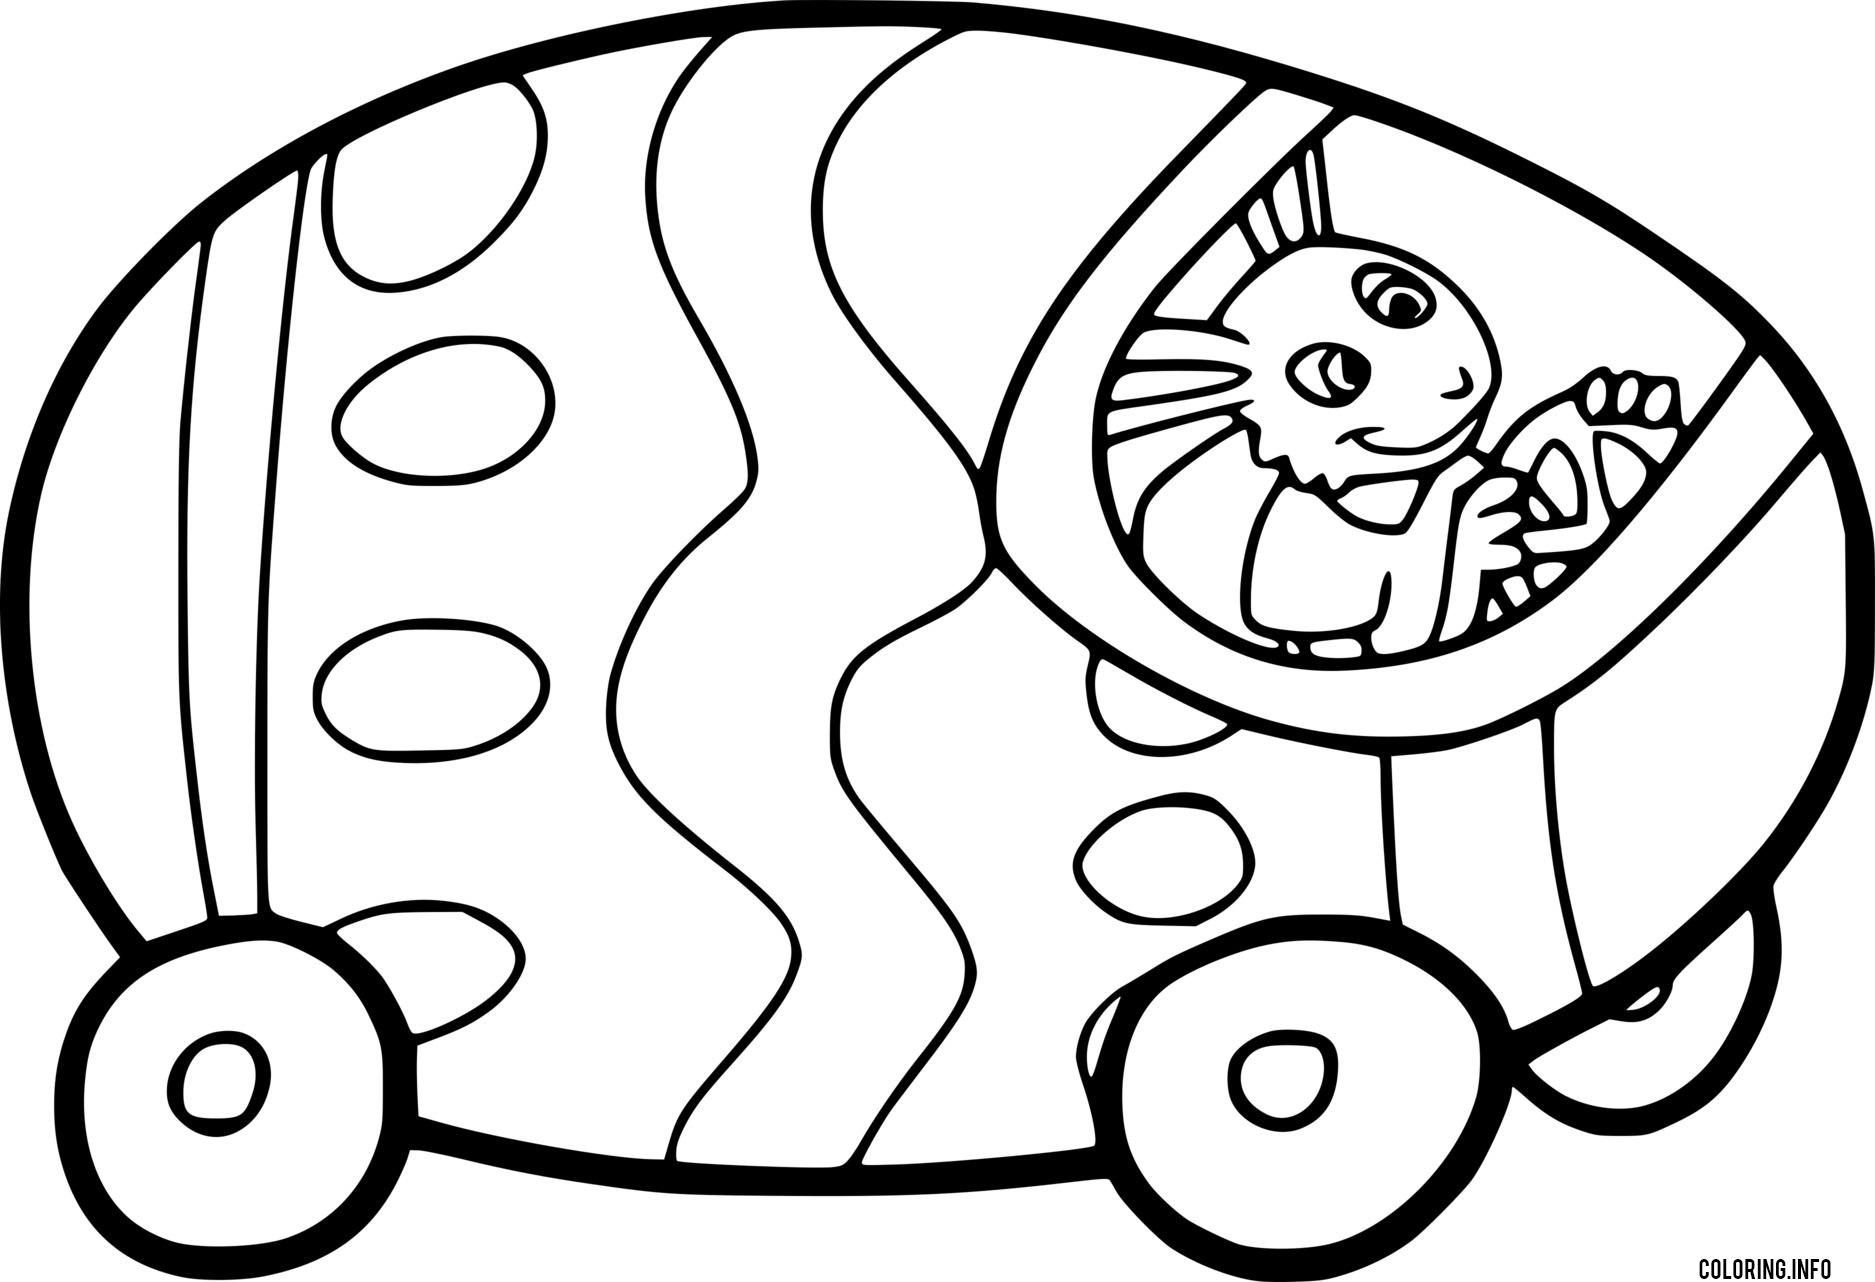 Bunny Drives An Easter Egg Car coloring